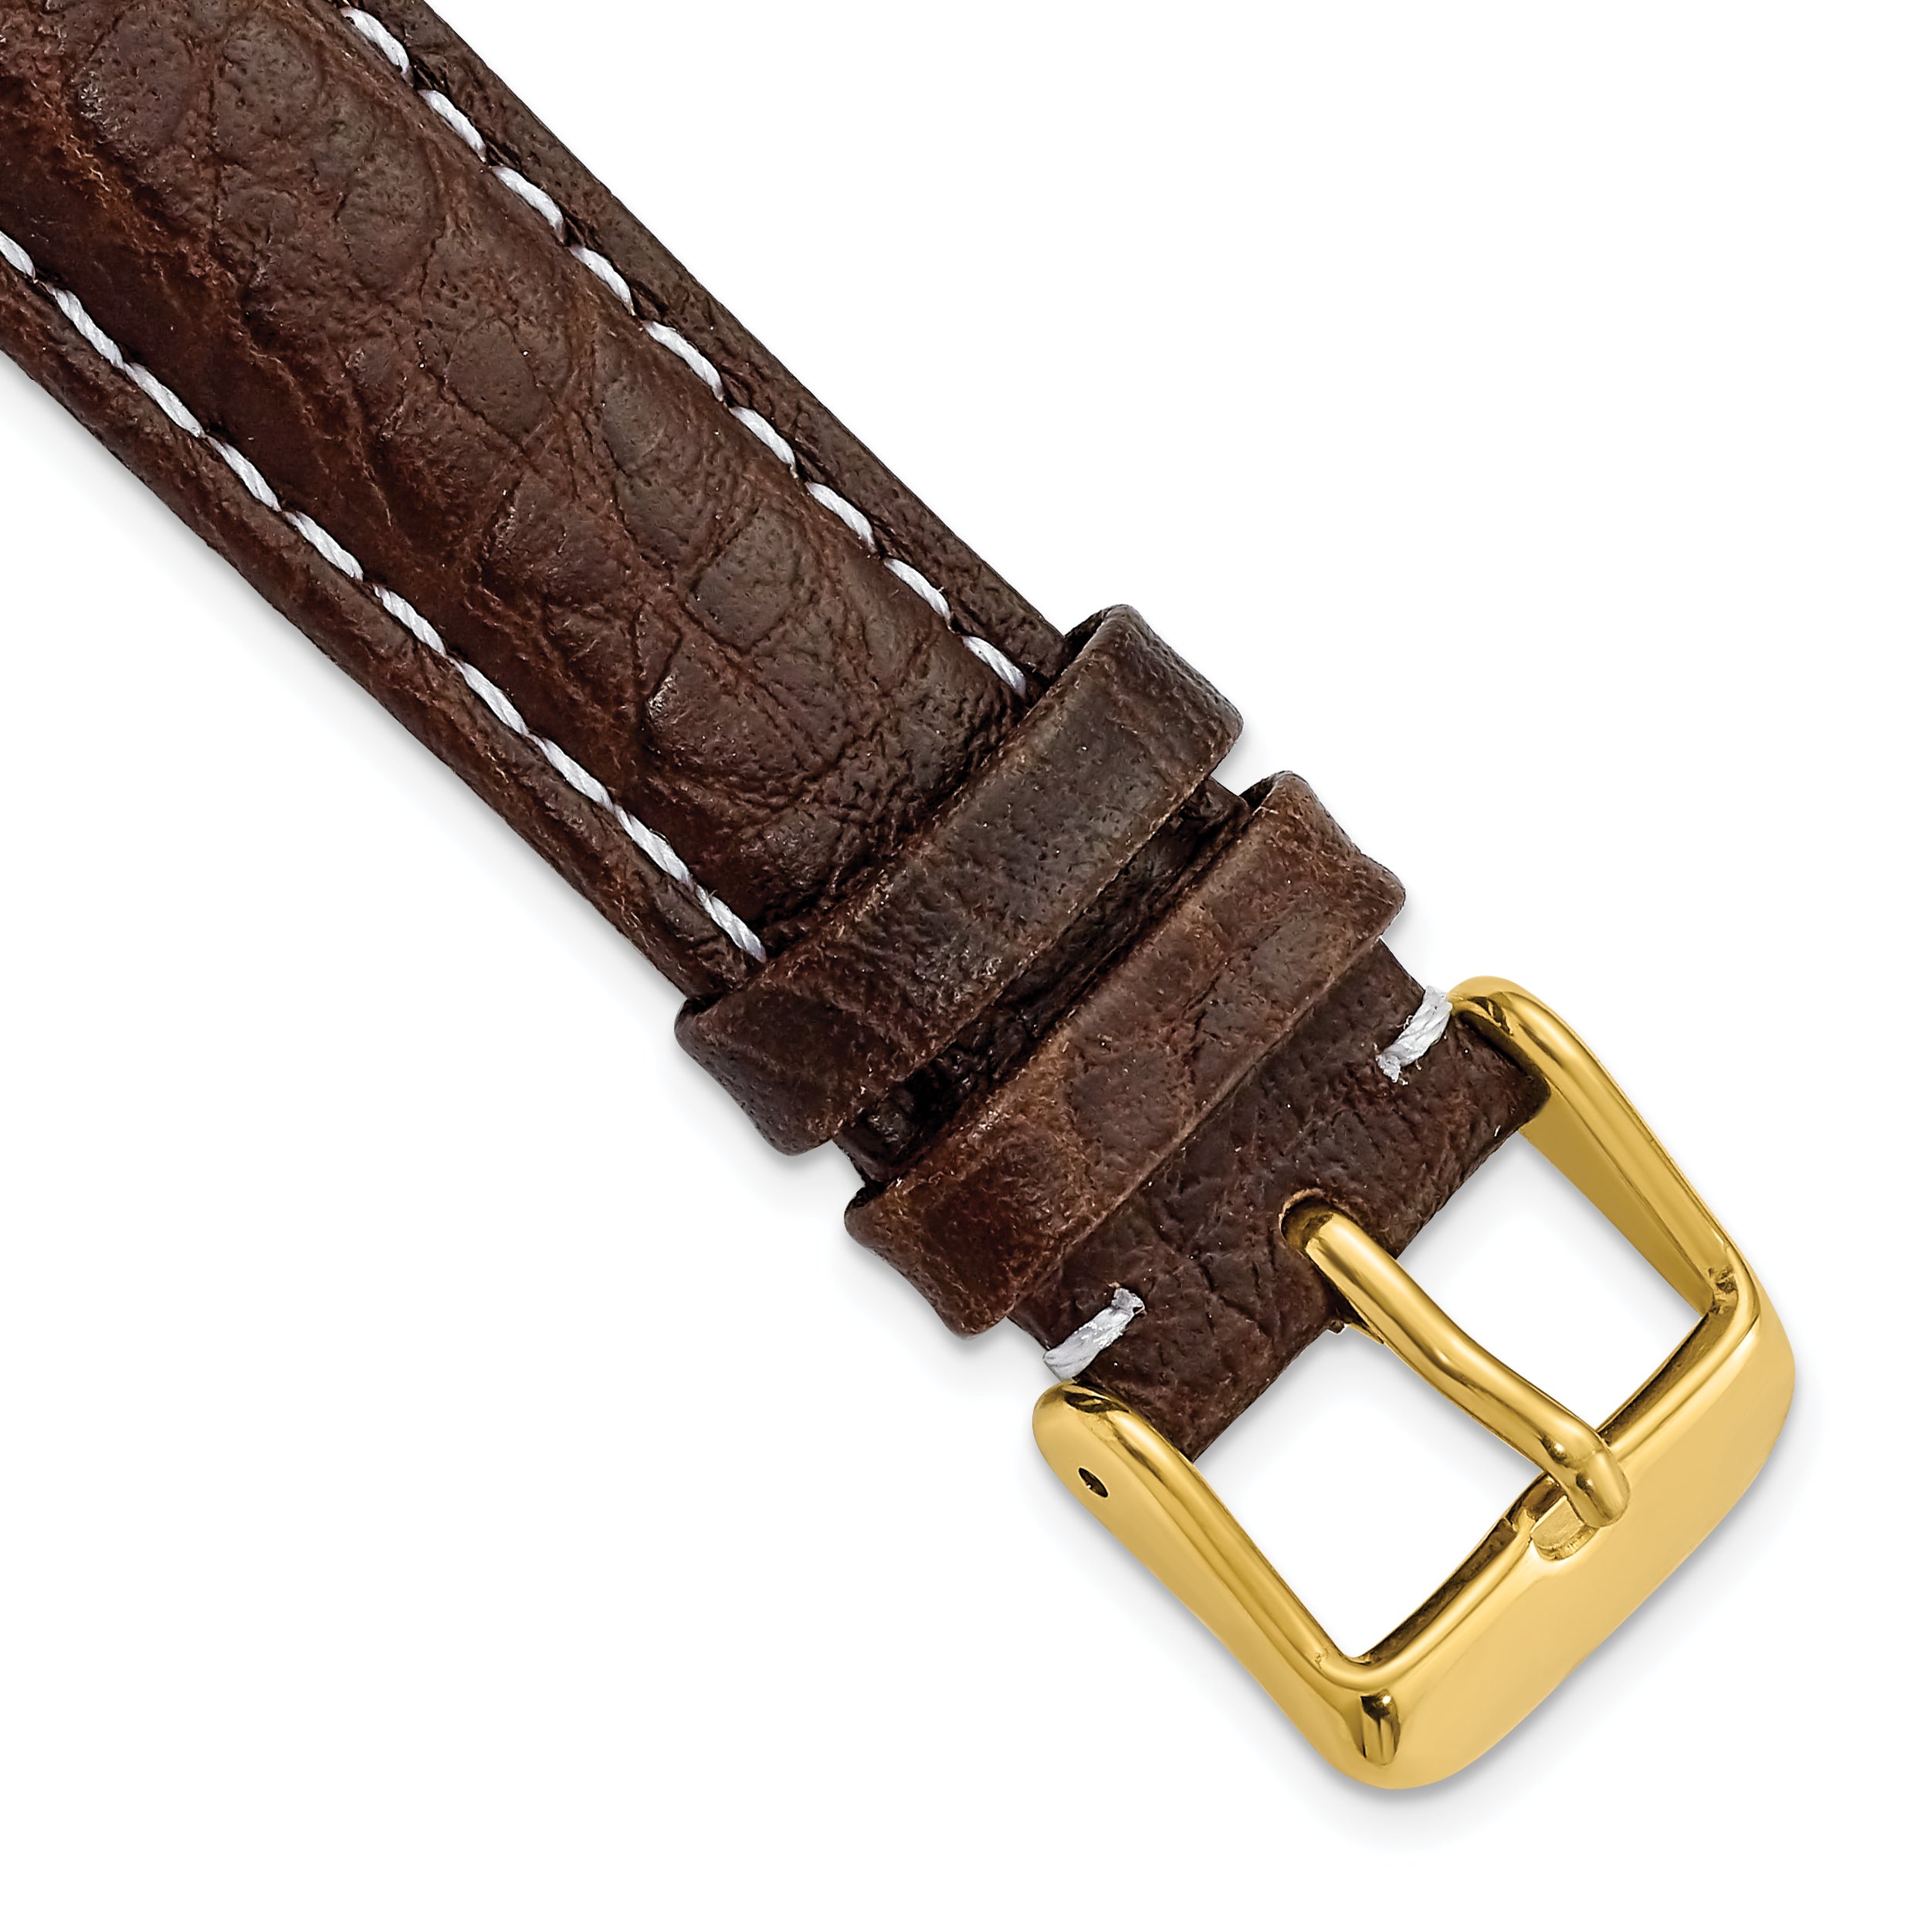 DeBeer 18mm Dark Brown Sport Leather with White Stitching and Gold-tone Buckle 7.5 inch Watch Band